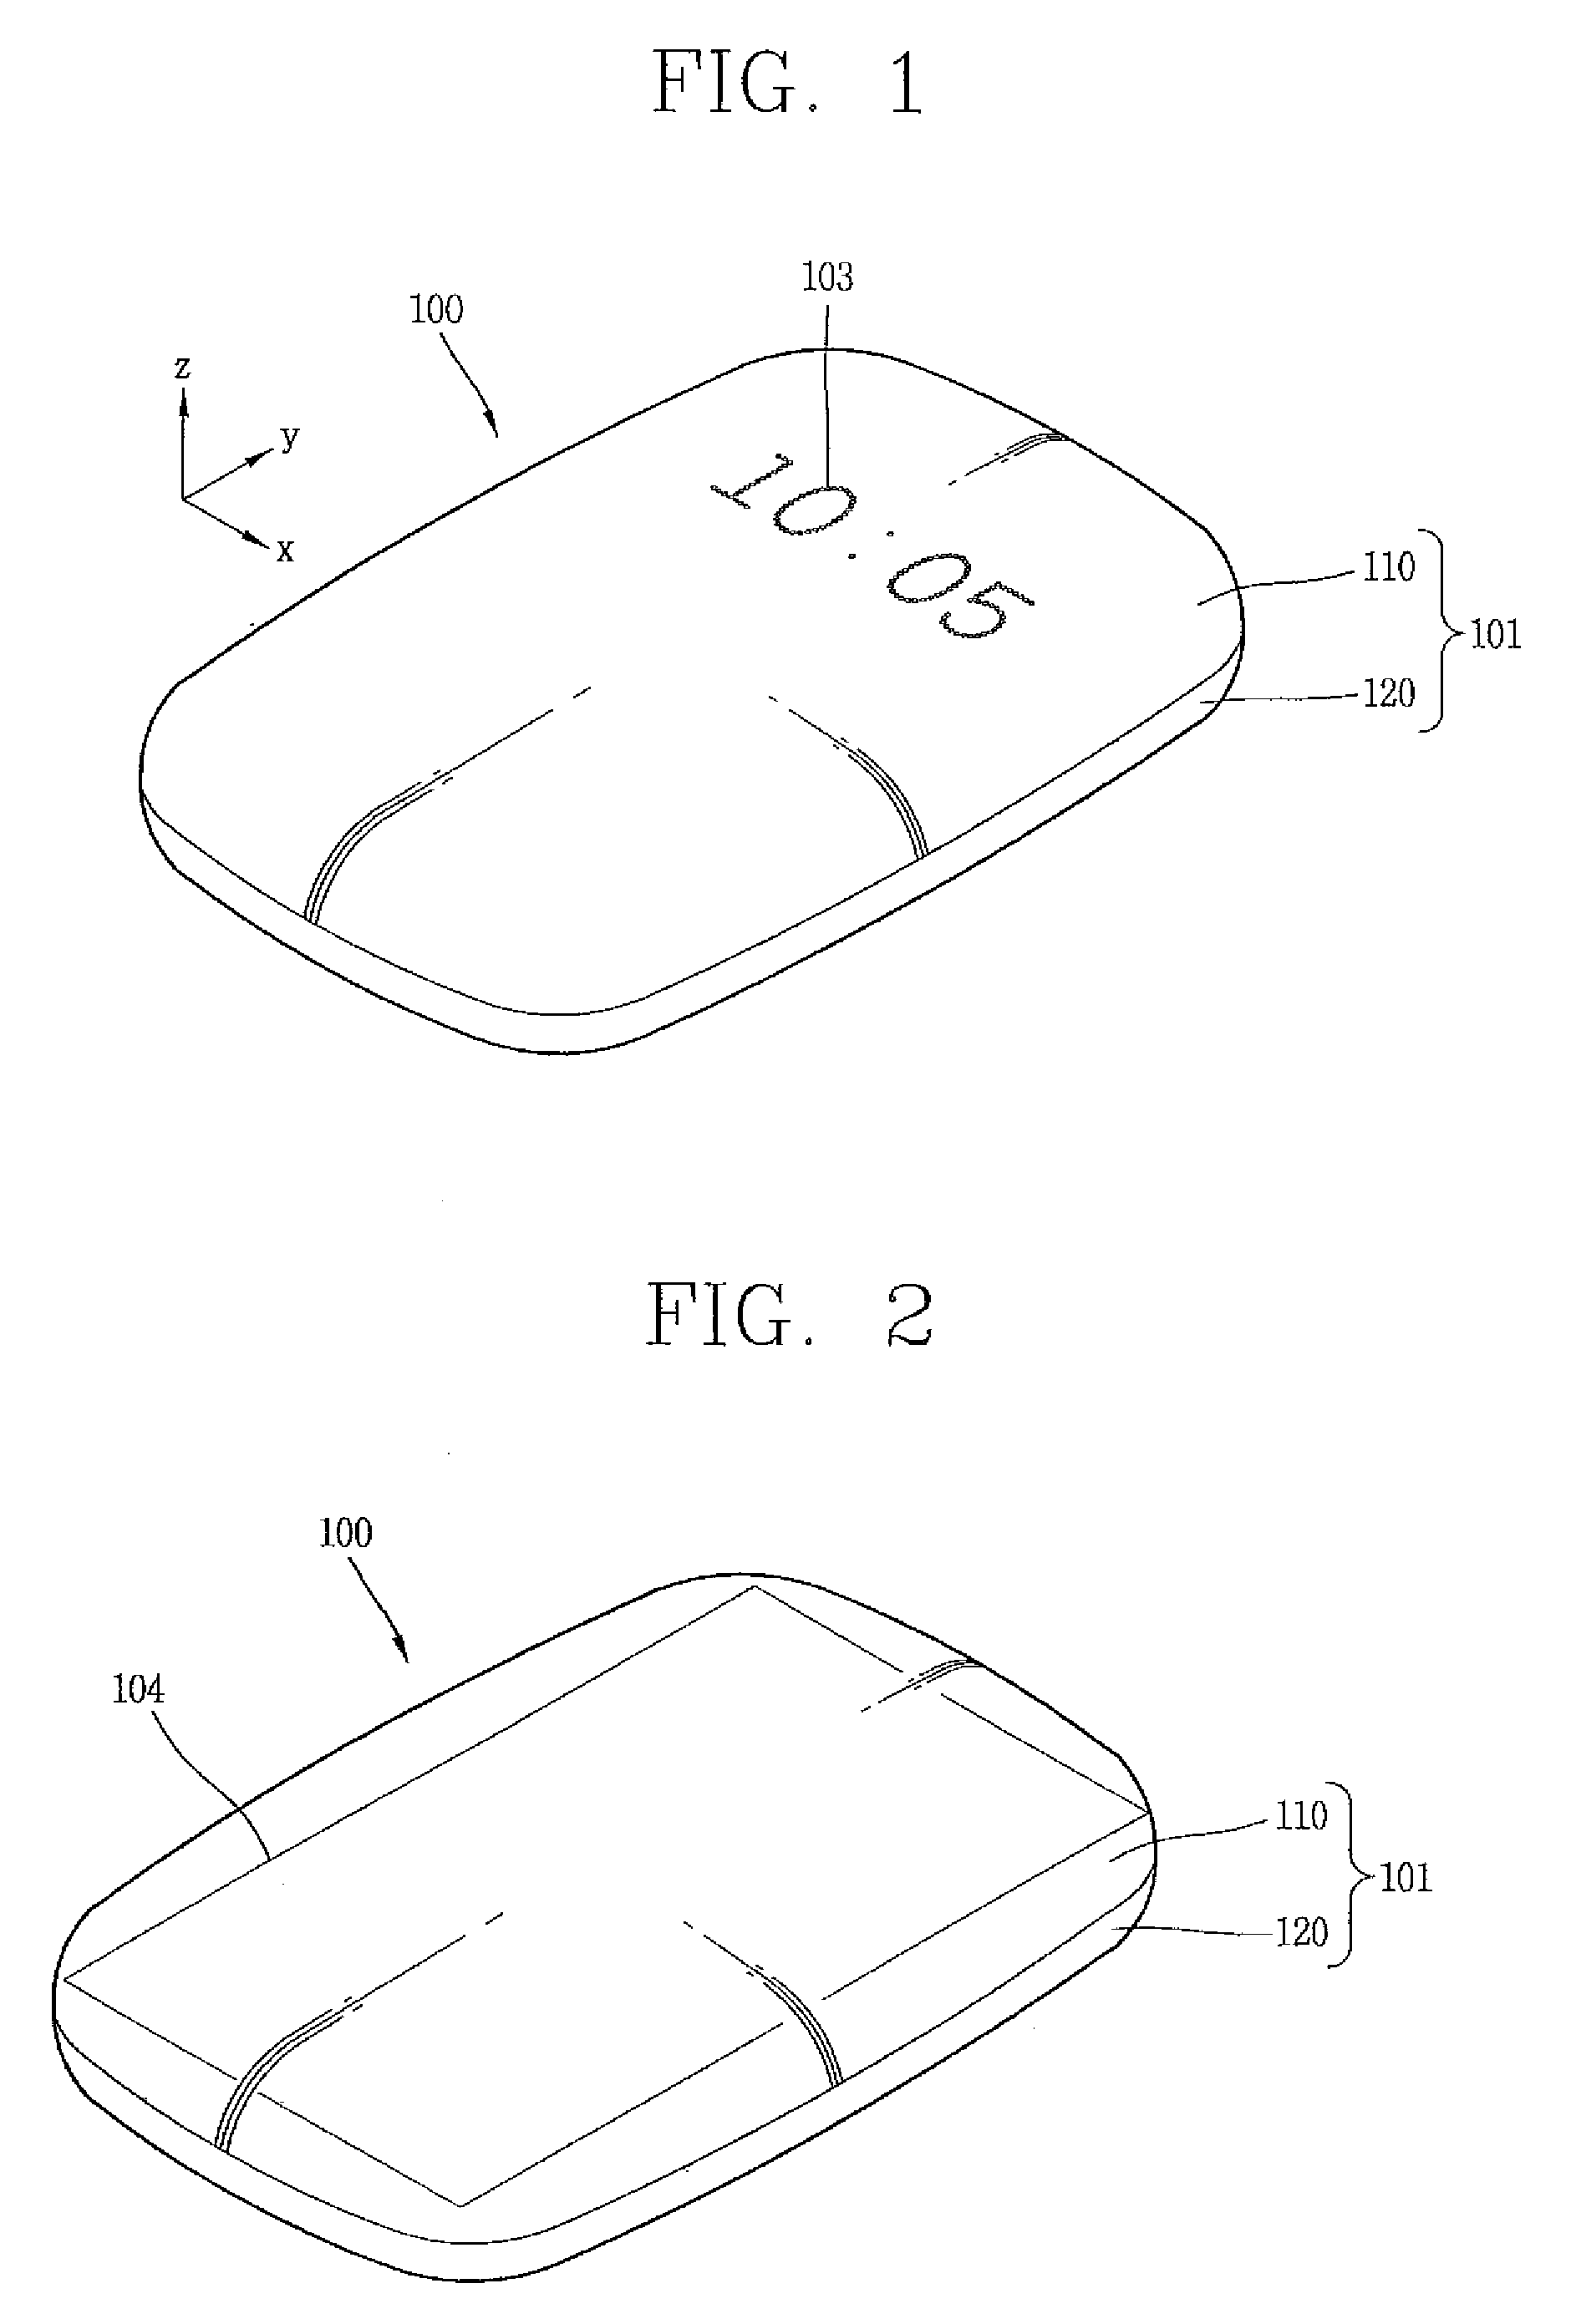 Cover for a mobile device and mobile device having same